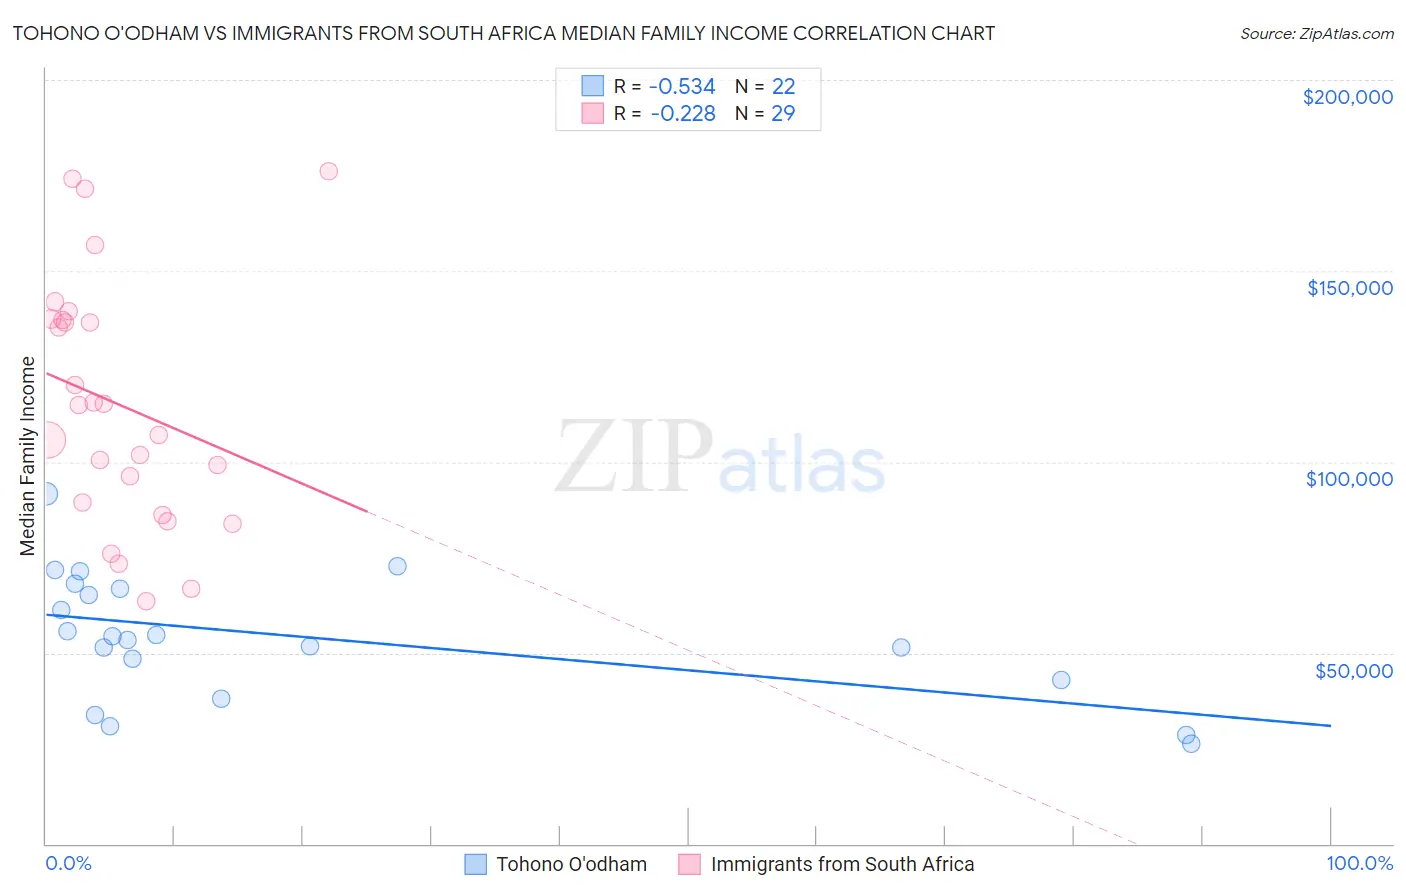 Tohono O'odham vs Immigrants from South Africa Median Family Income